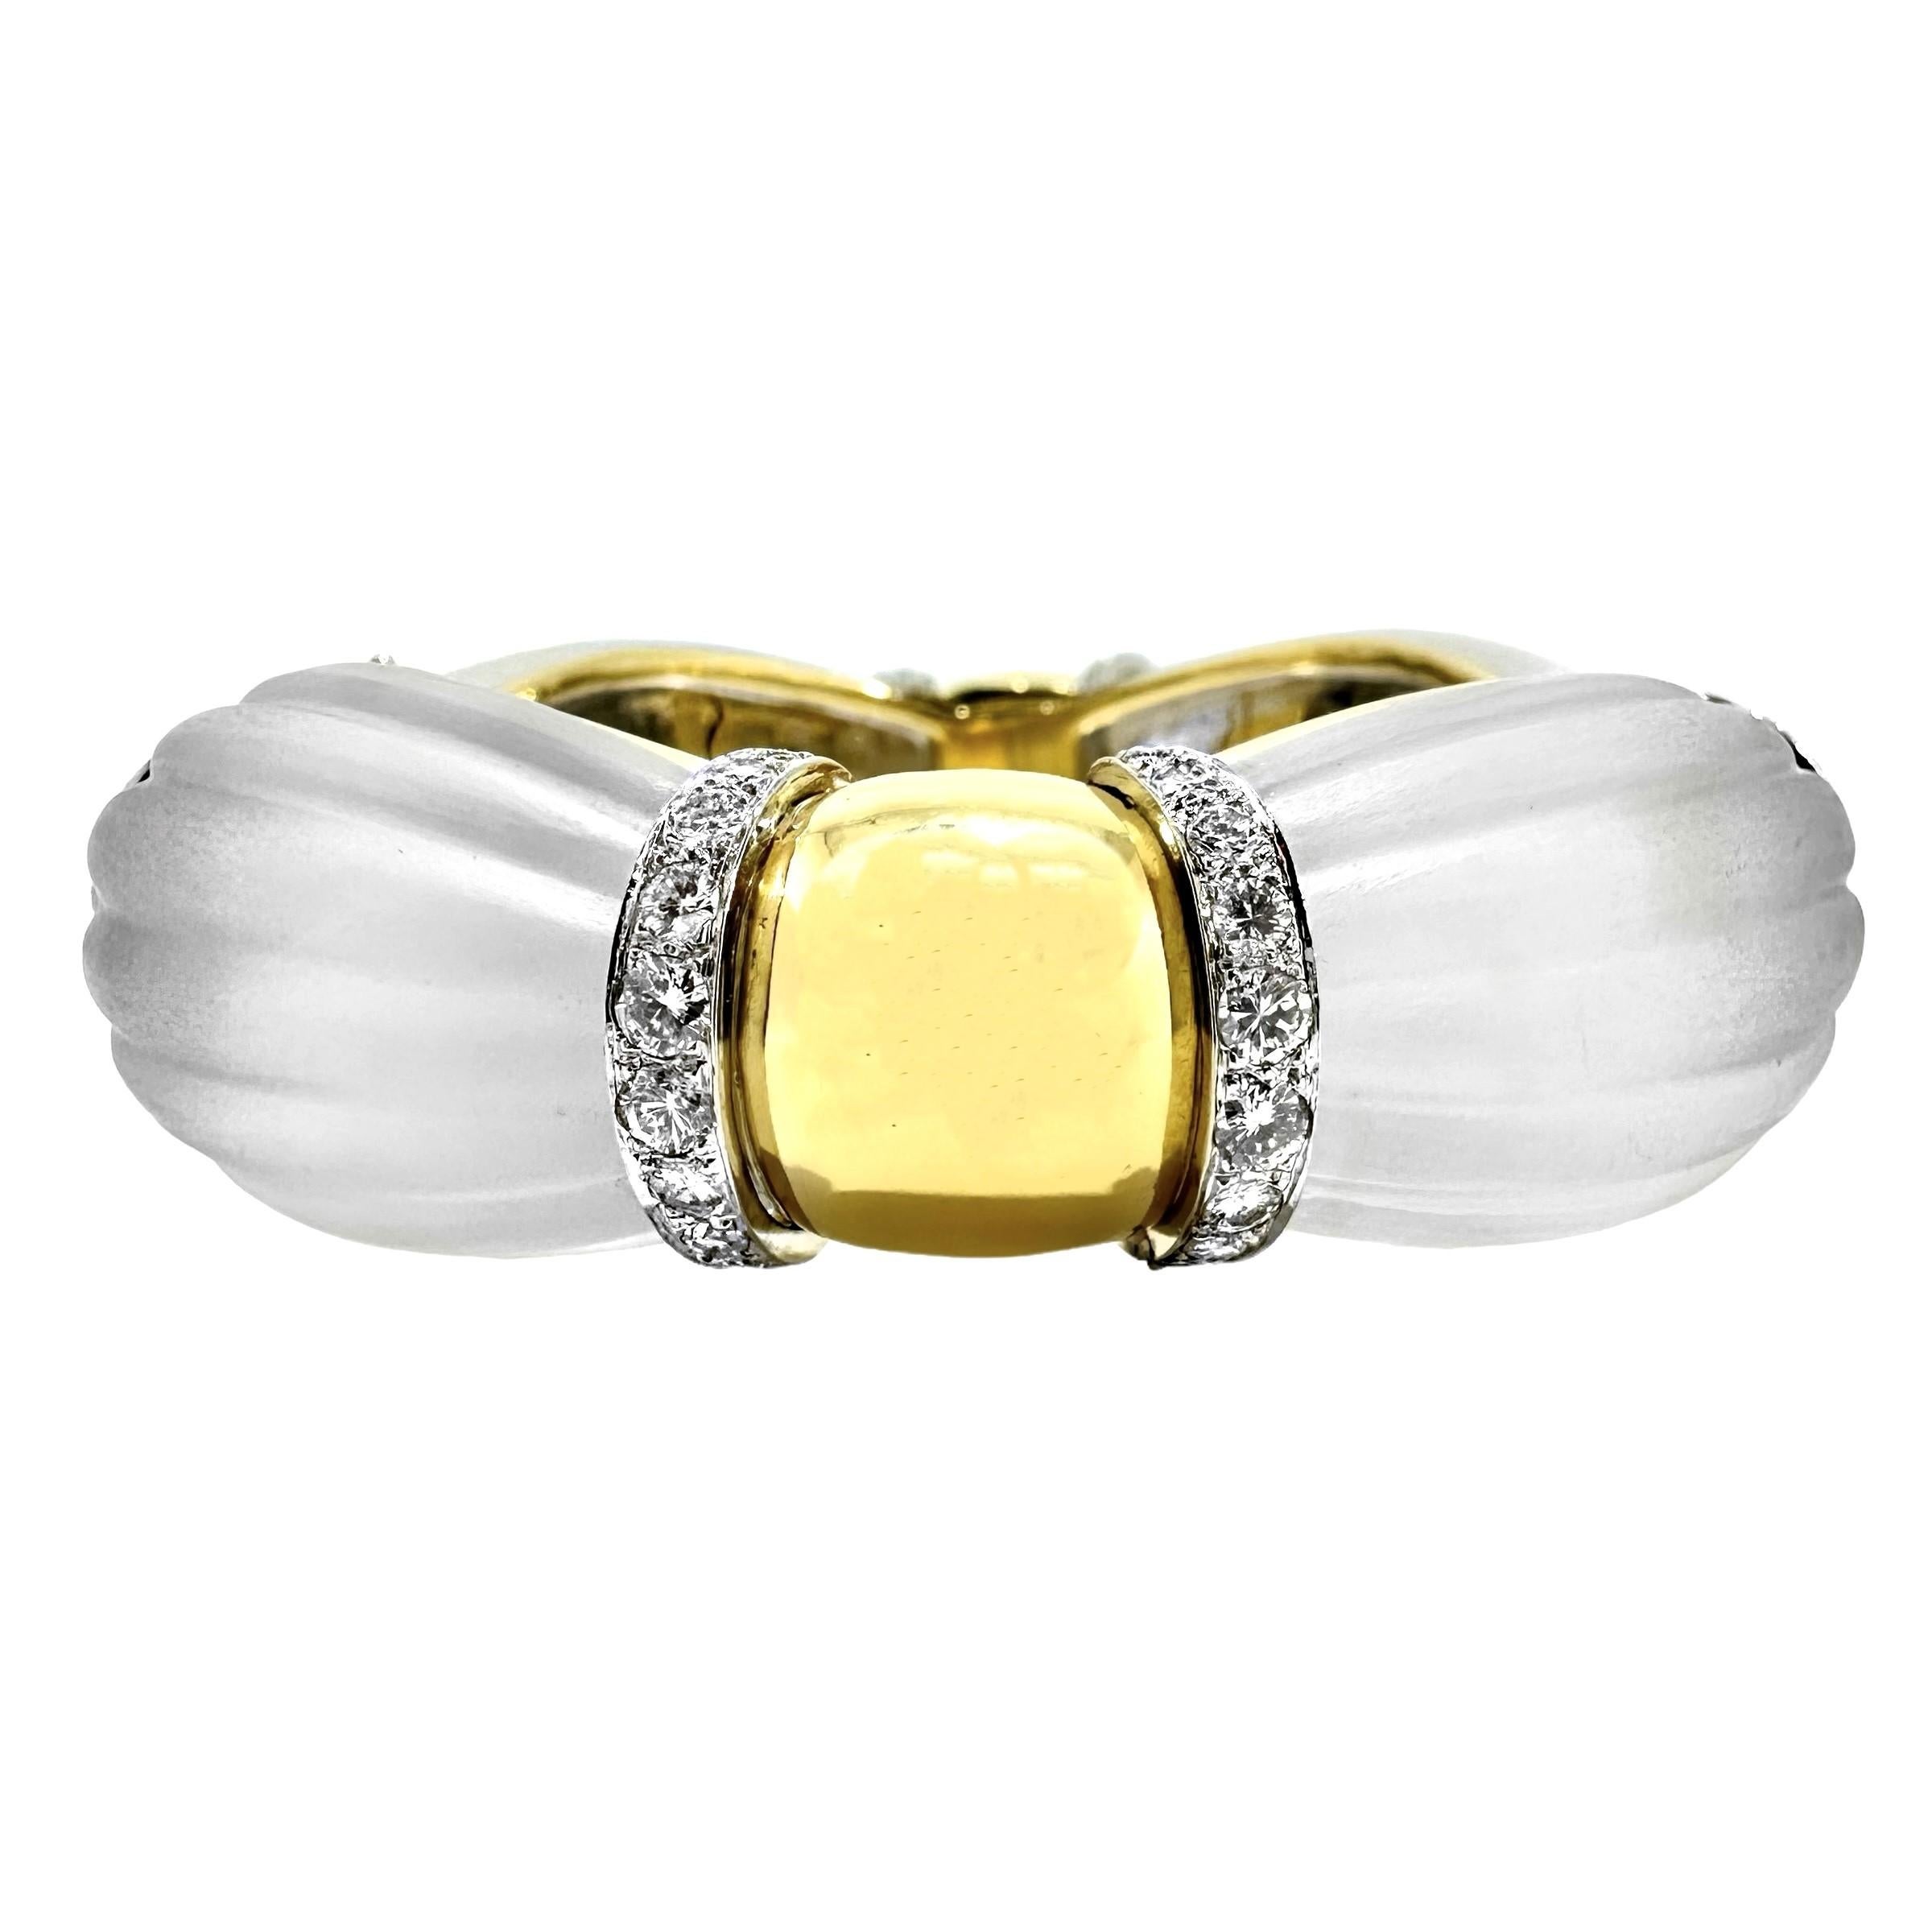 This splendid and very substantial hinged bangle bracelet is a wonderful example of Mid-20th century style and quality workmanship. Four large and dramatic frosted and fluted rock crystal cabochon panels are interrupted at four positions with bombe